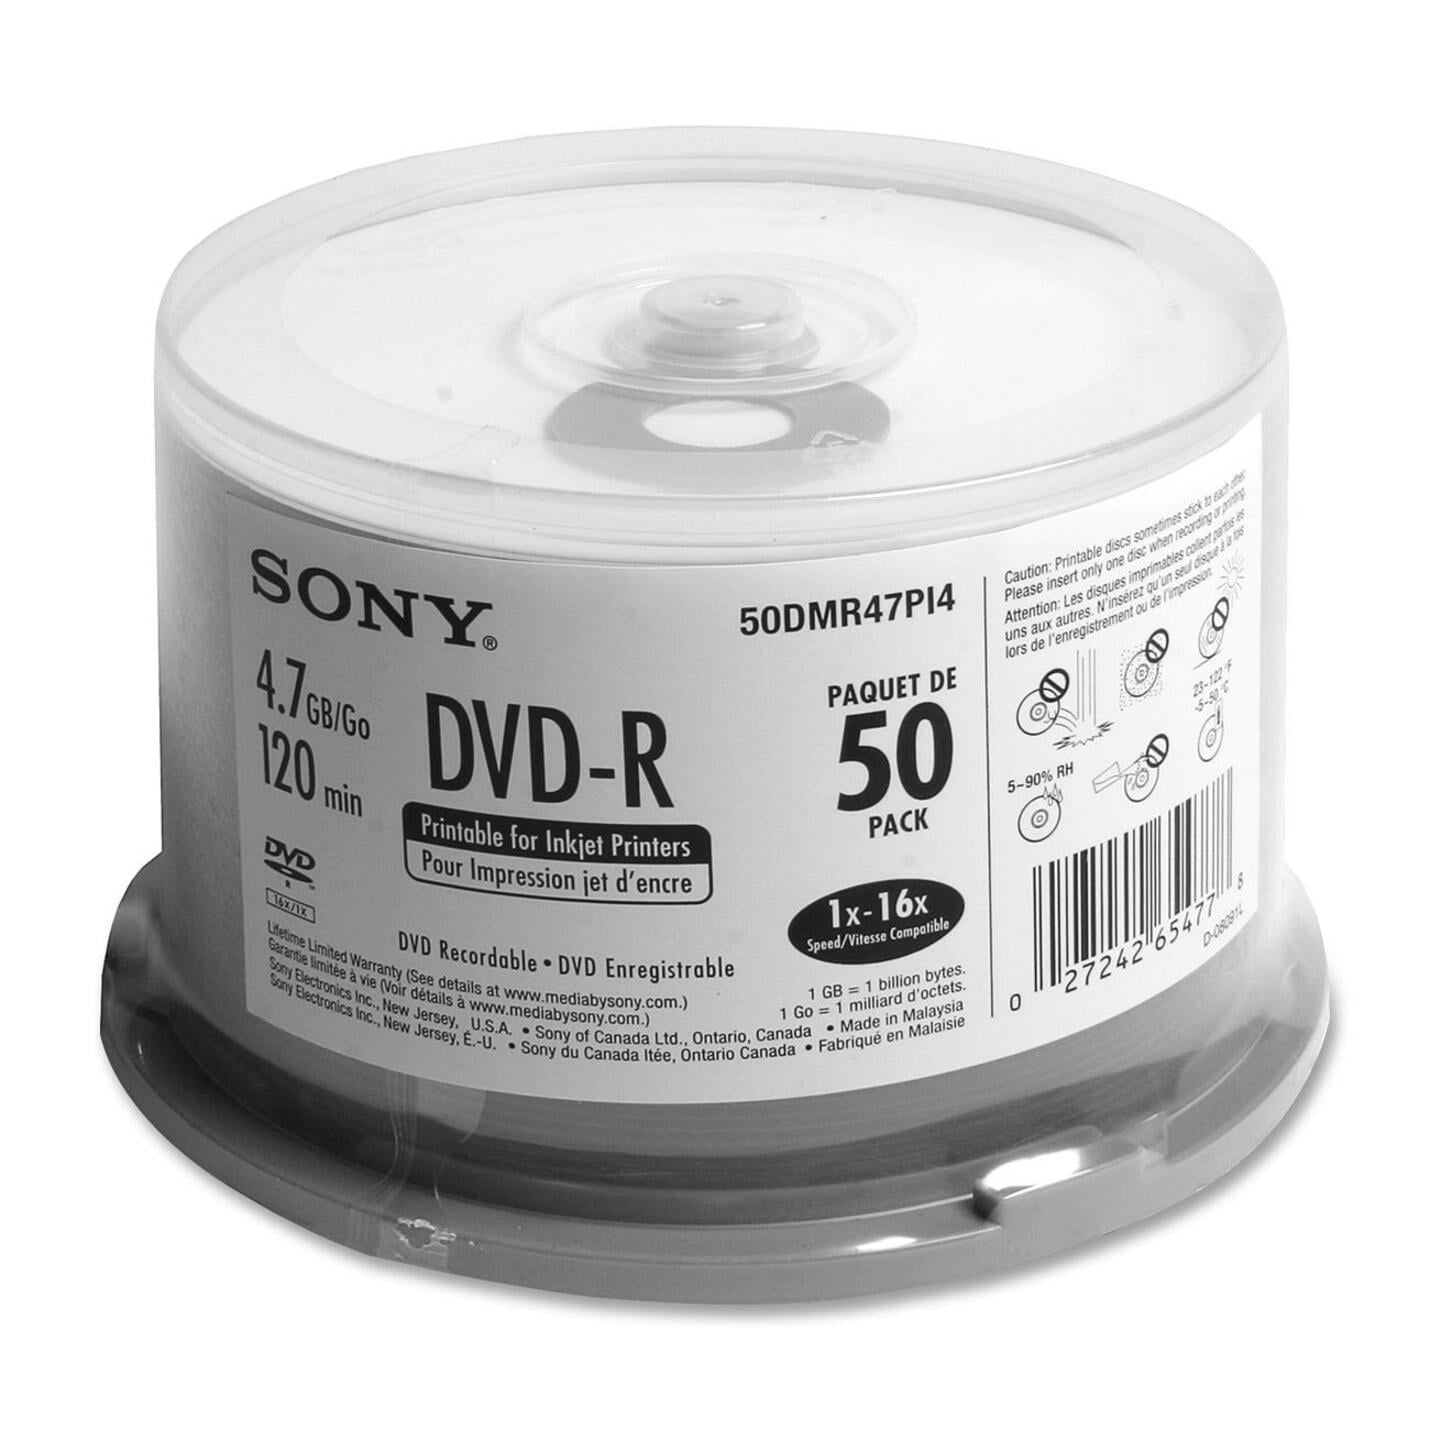 4.70　DVD-R,　Spindle　Sony　Media,　16x,　Pack　DVD　50　Recordable　GB,